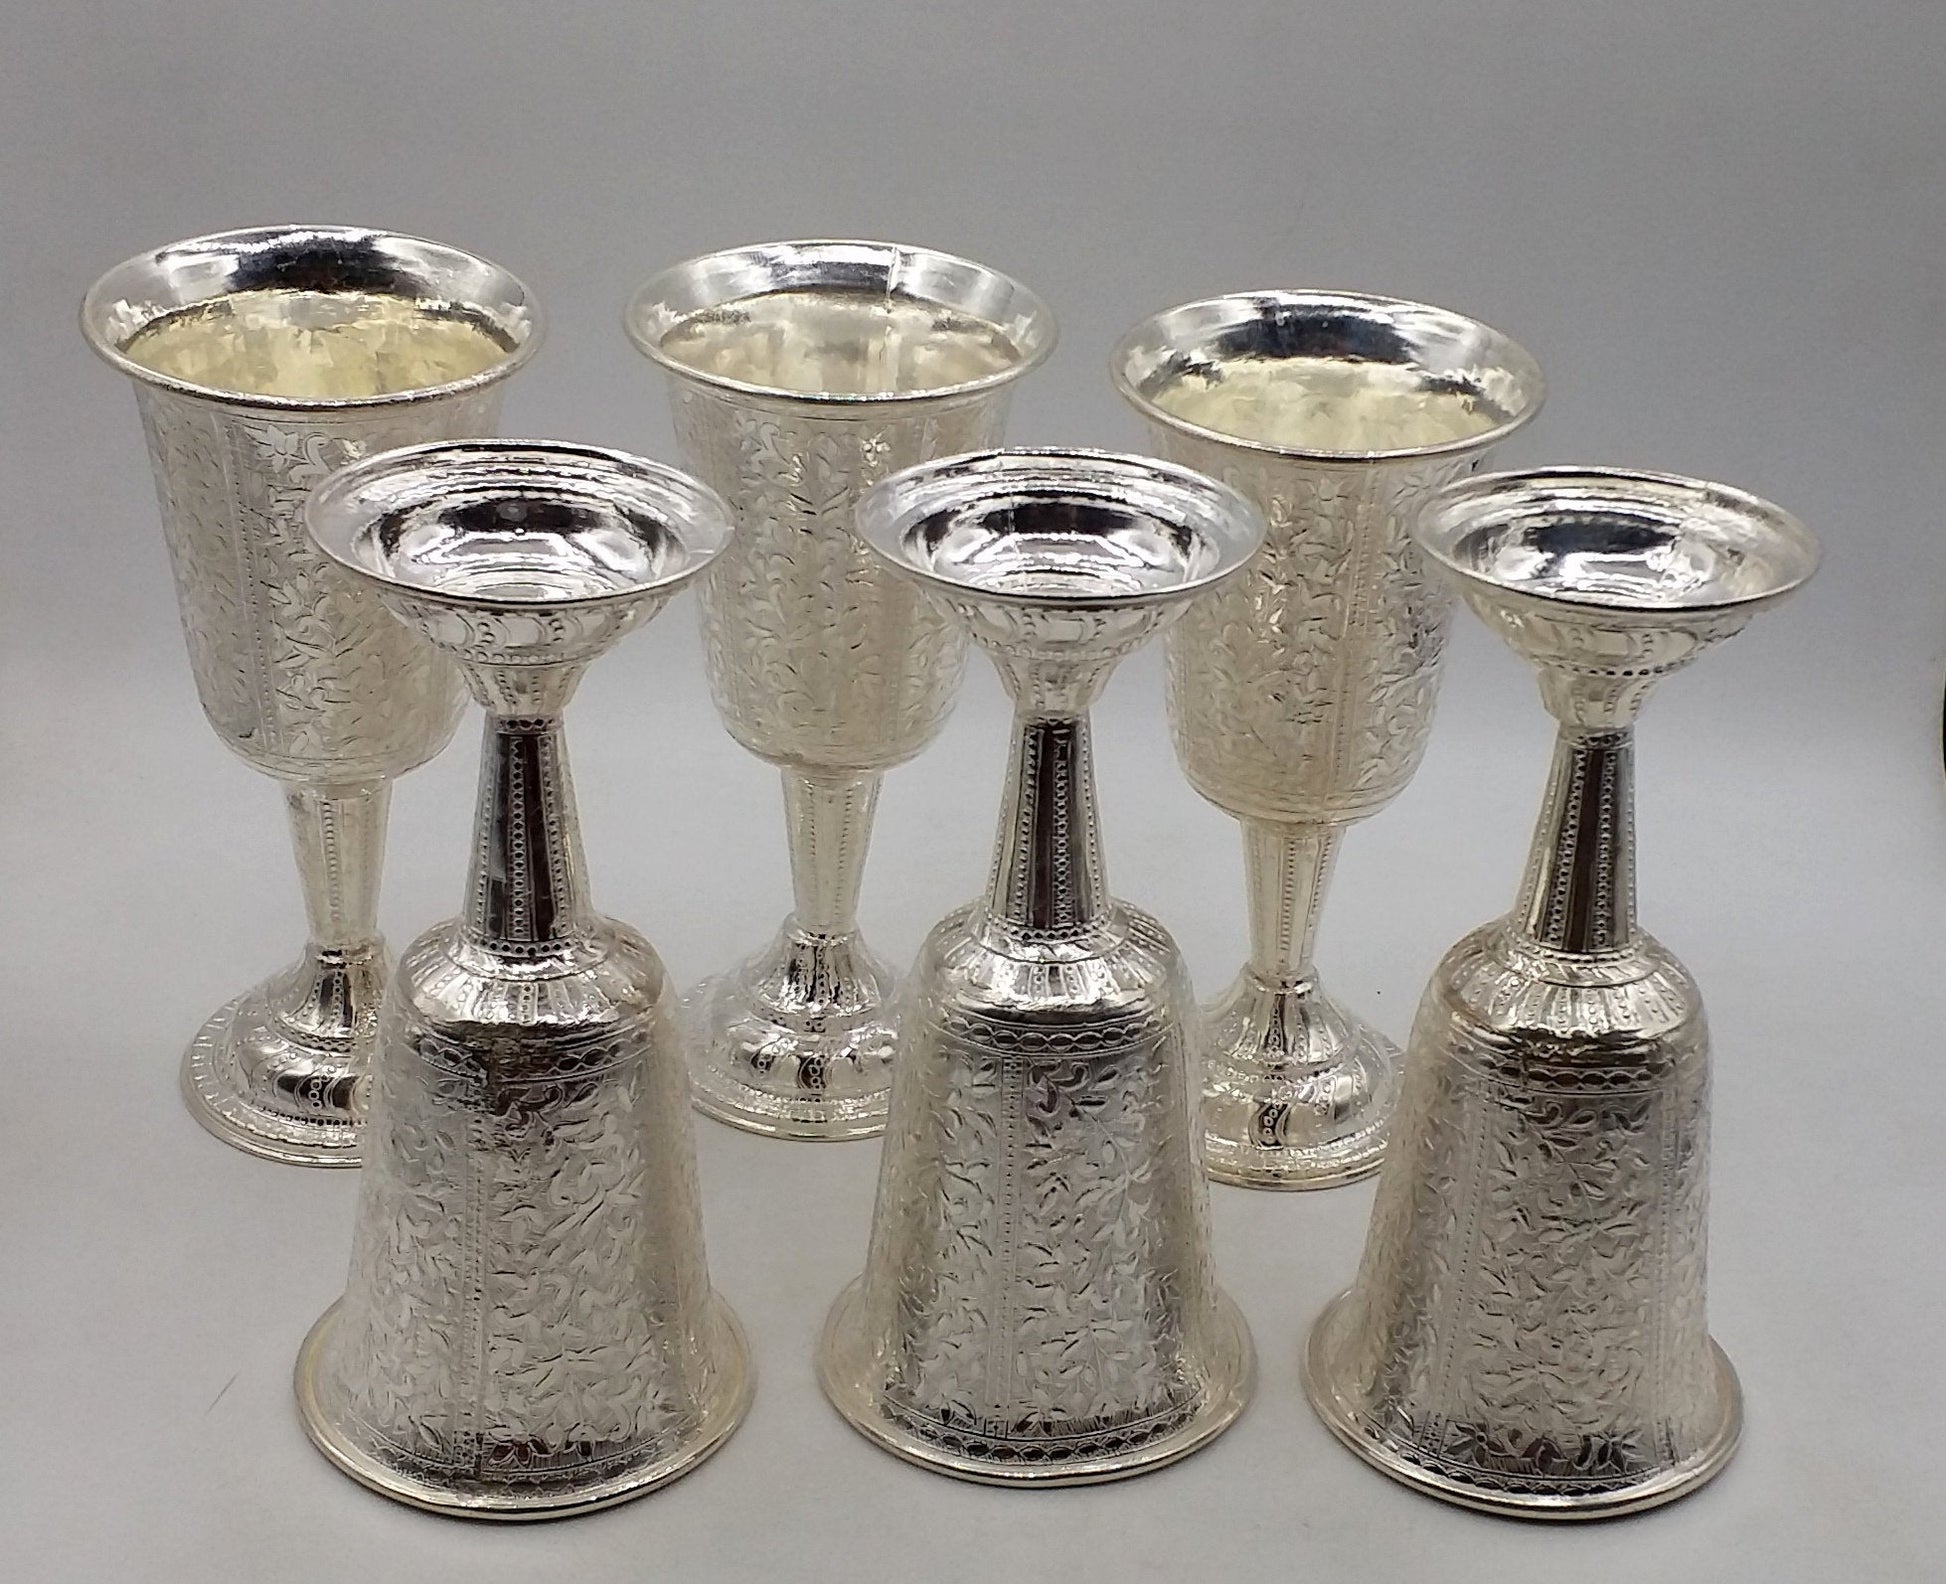 925 sterling silver handmade engraved floral design set of 6 wine glass, best gifting glasses, silver utensils, silver articles water glass - TRIBAL ORNAMENTS